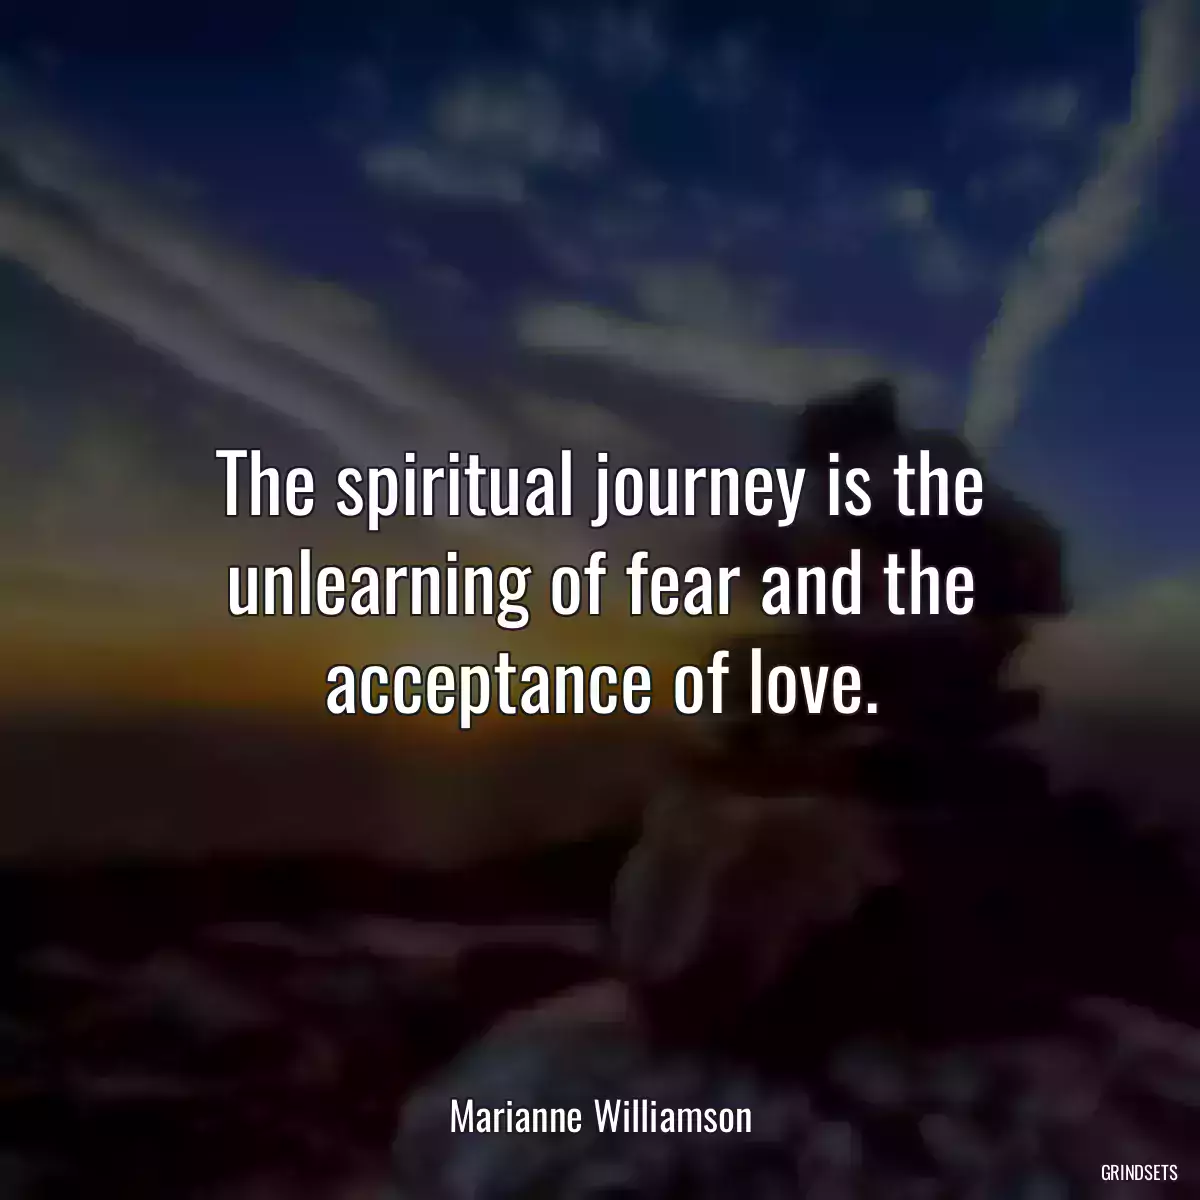 The spiritual journey is the unlearning of fear and the acceptance of love.